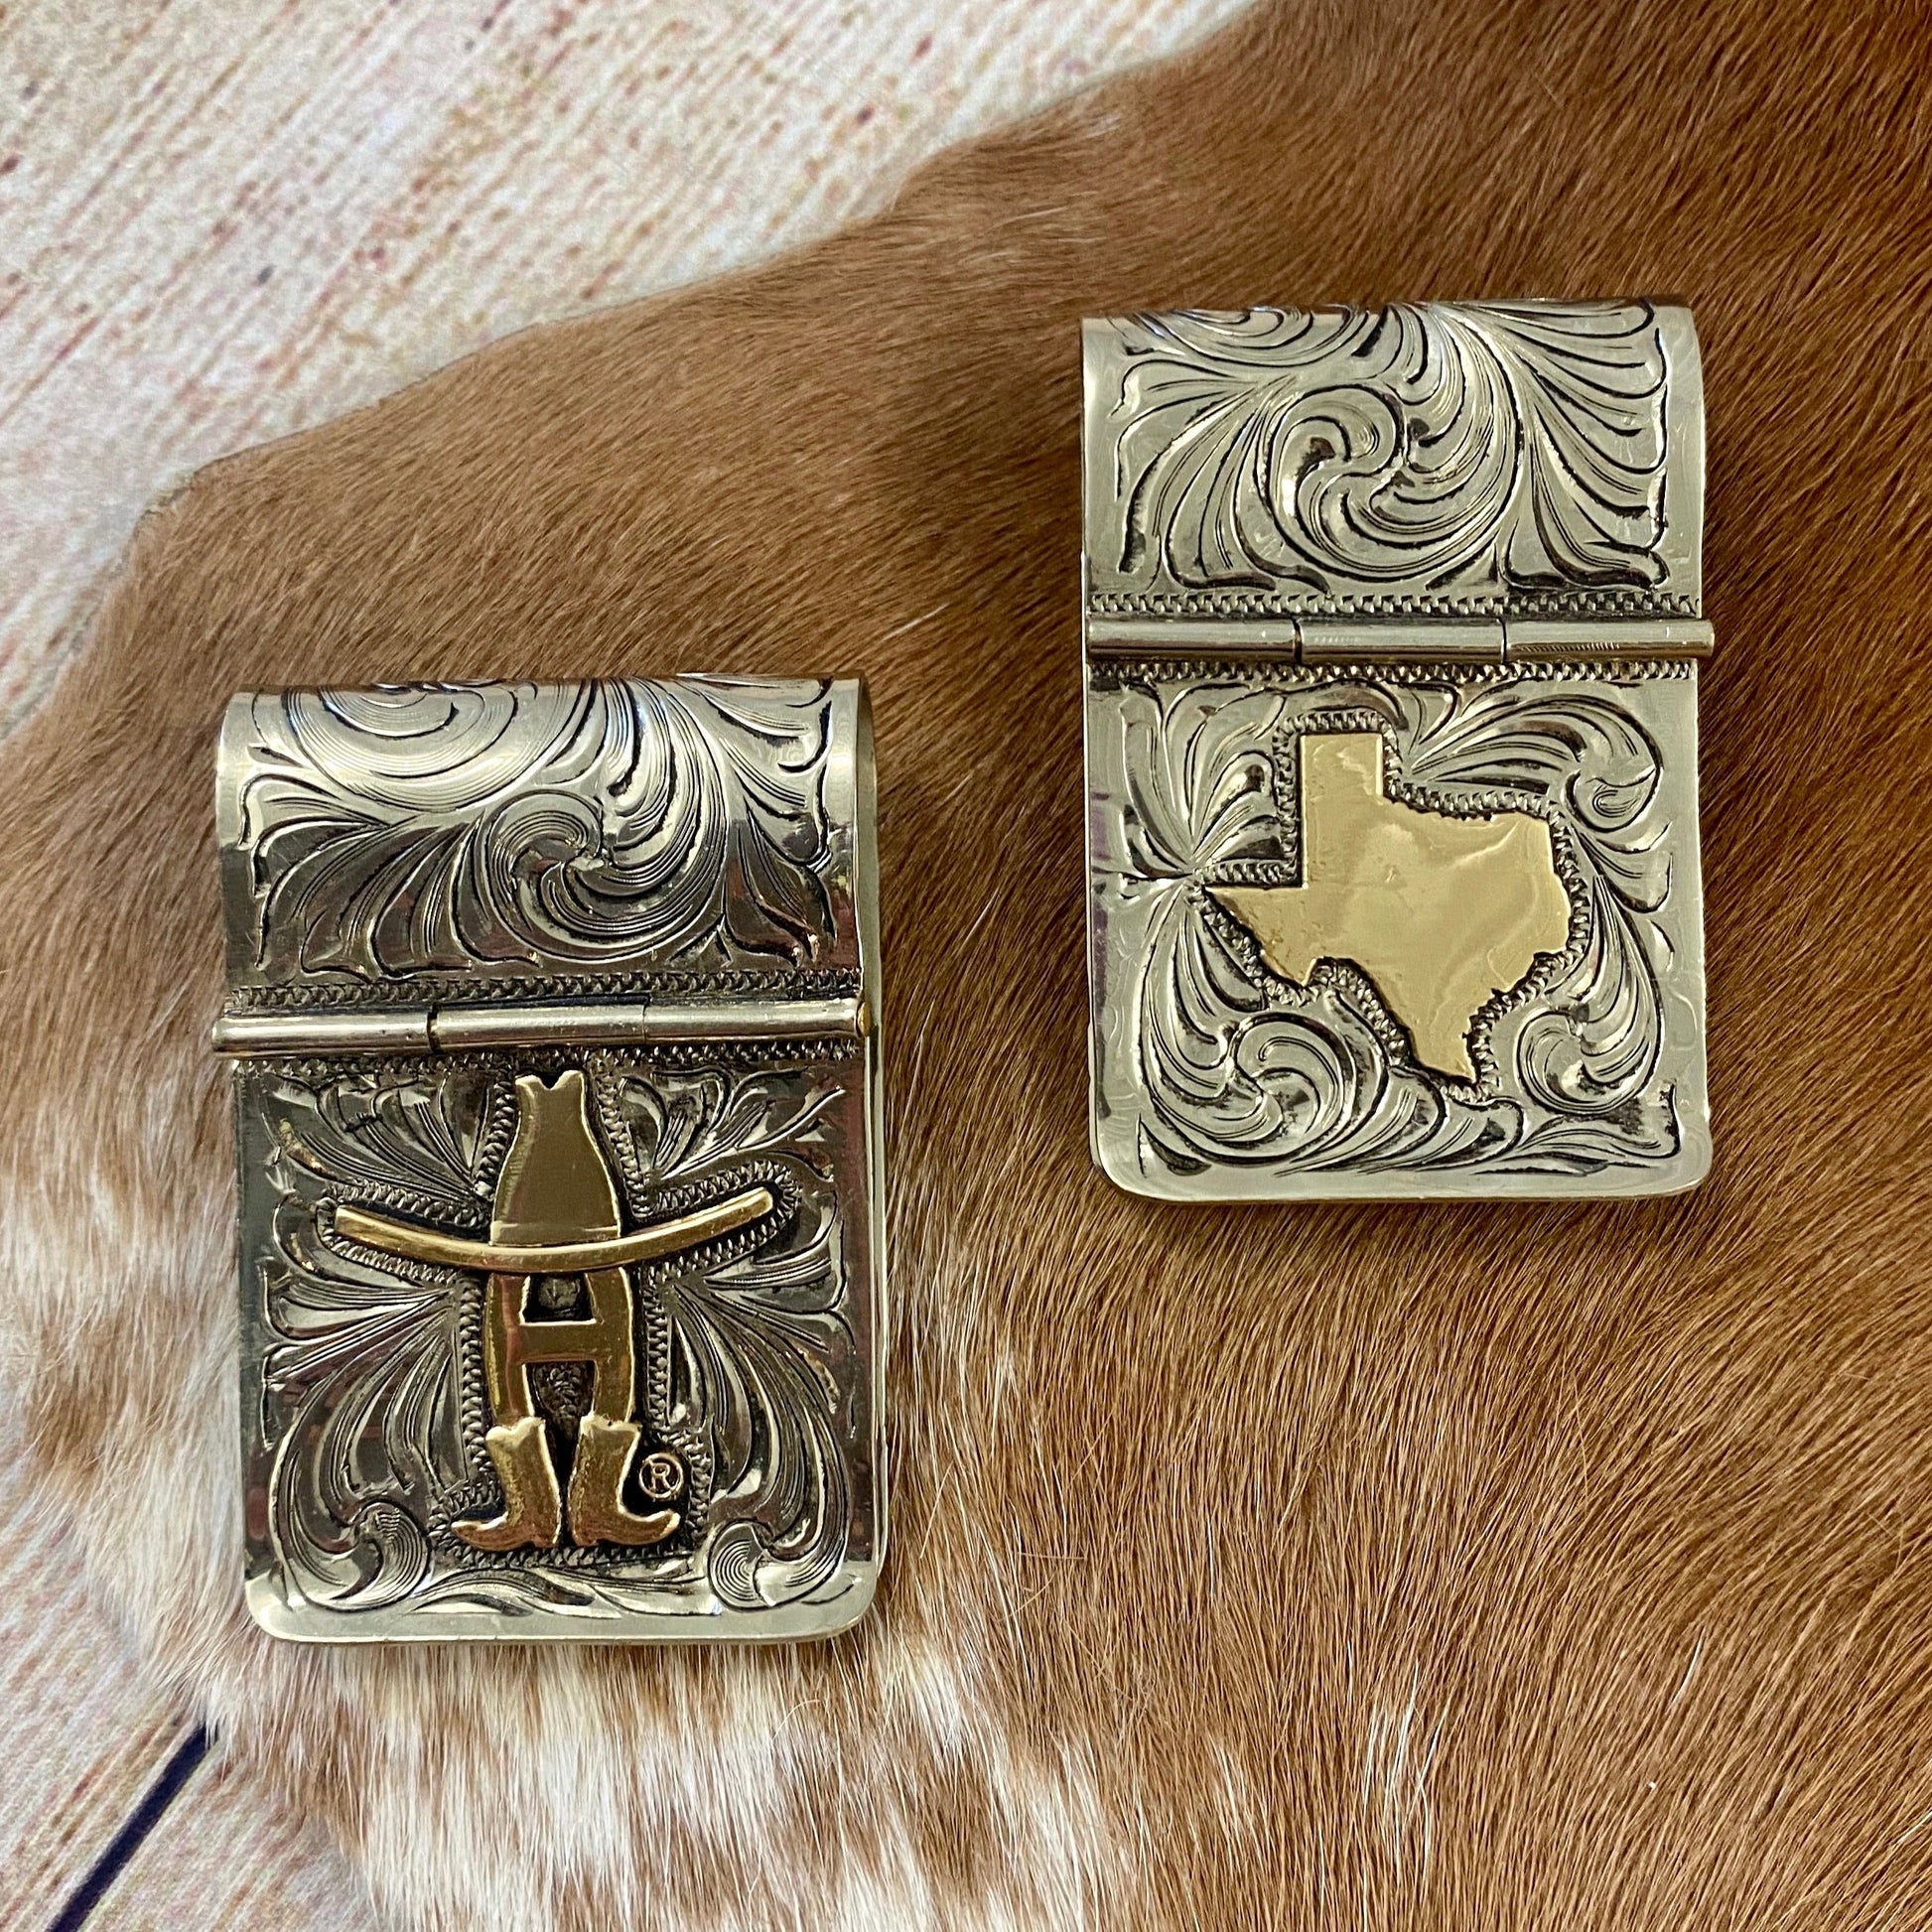 The Texas Rodeo Large Money Clip - Ny Texas Style Boutique Texas Handmade Silver Plate Money Clip | Gifts For Him Cowboy Rancher